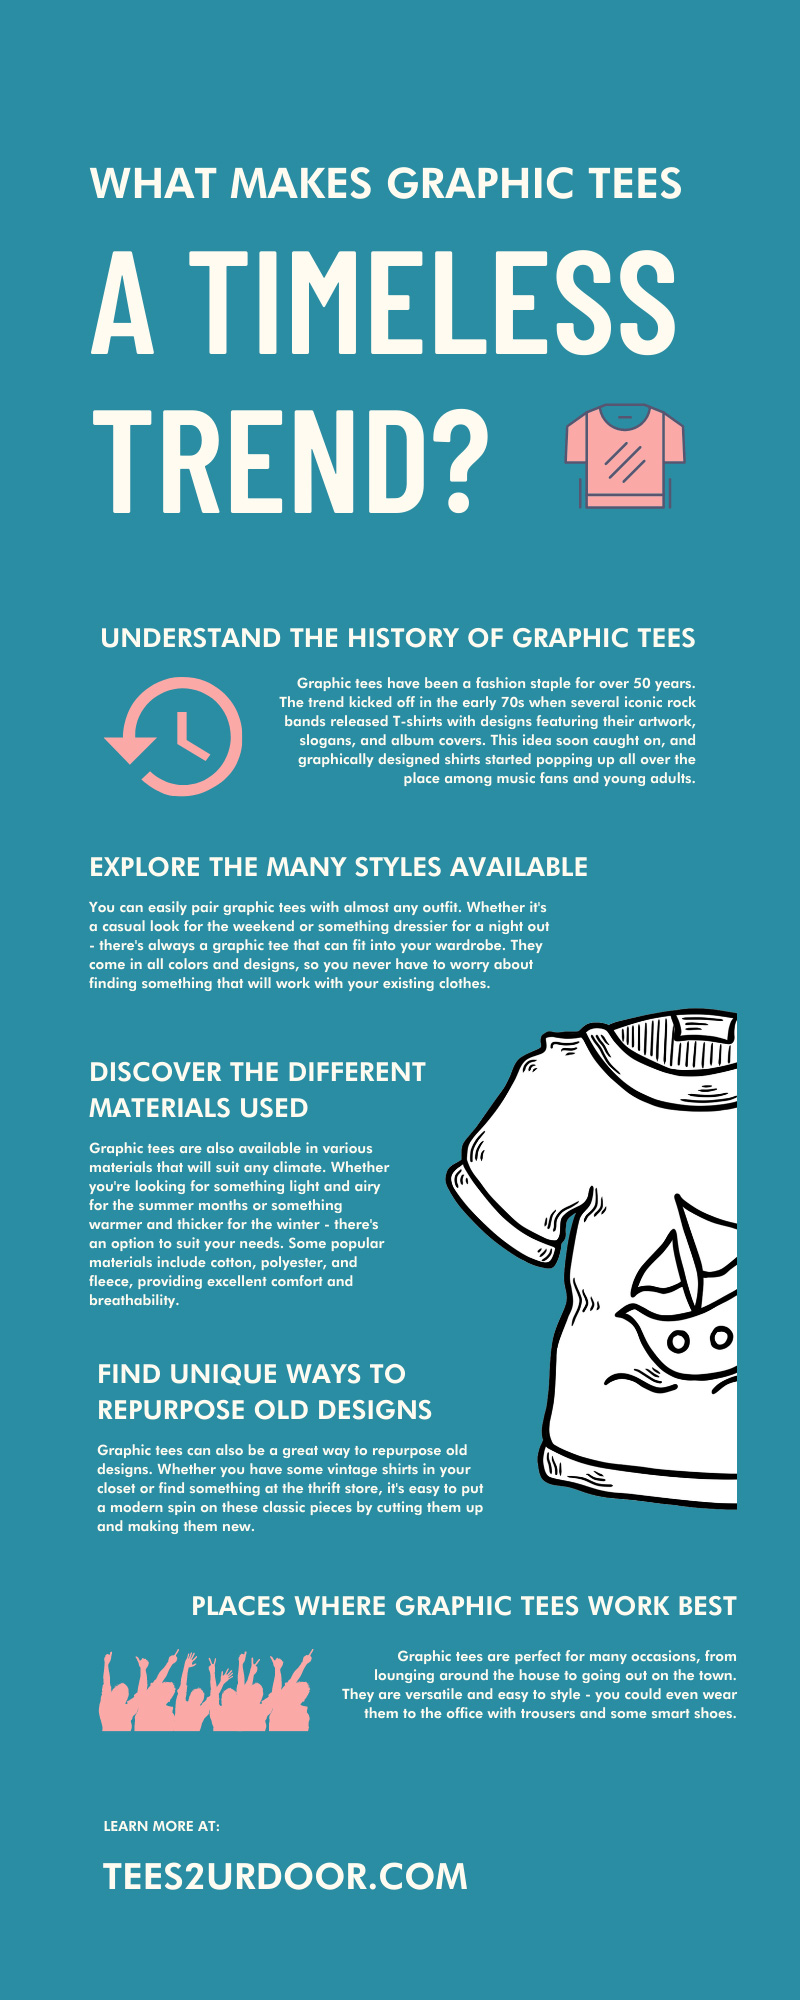 What Makes Graphic Tees a Timeless Trend?